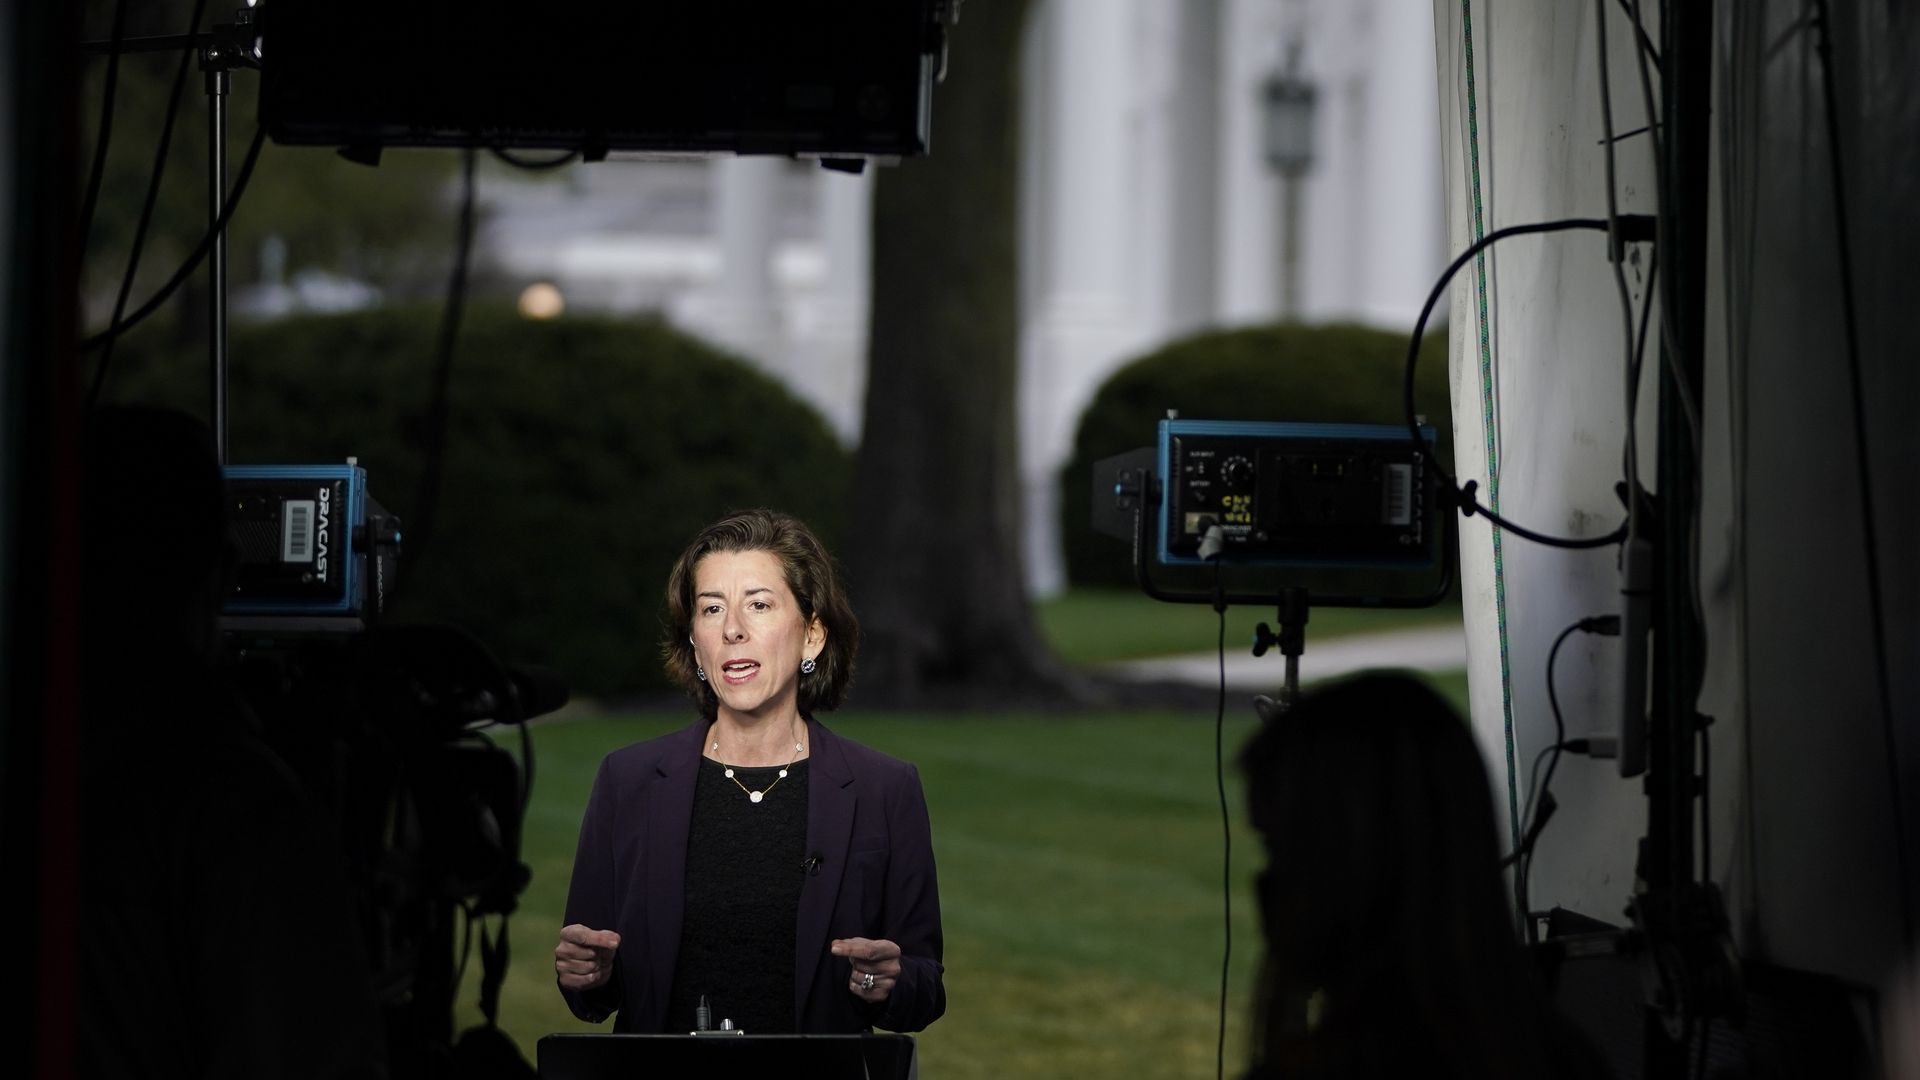 Commerce Secretary Gina Raimondo is seen giving a television interview from the White House lawn.